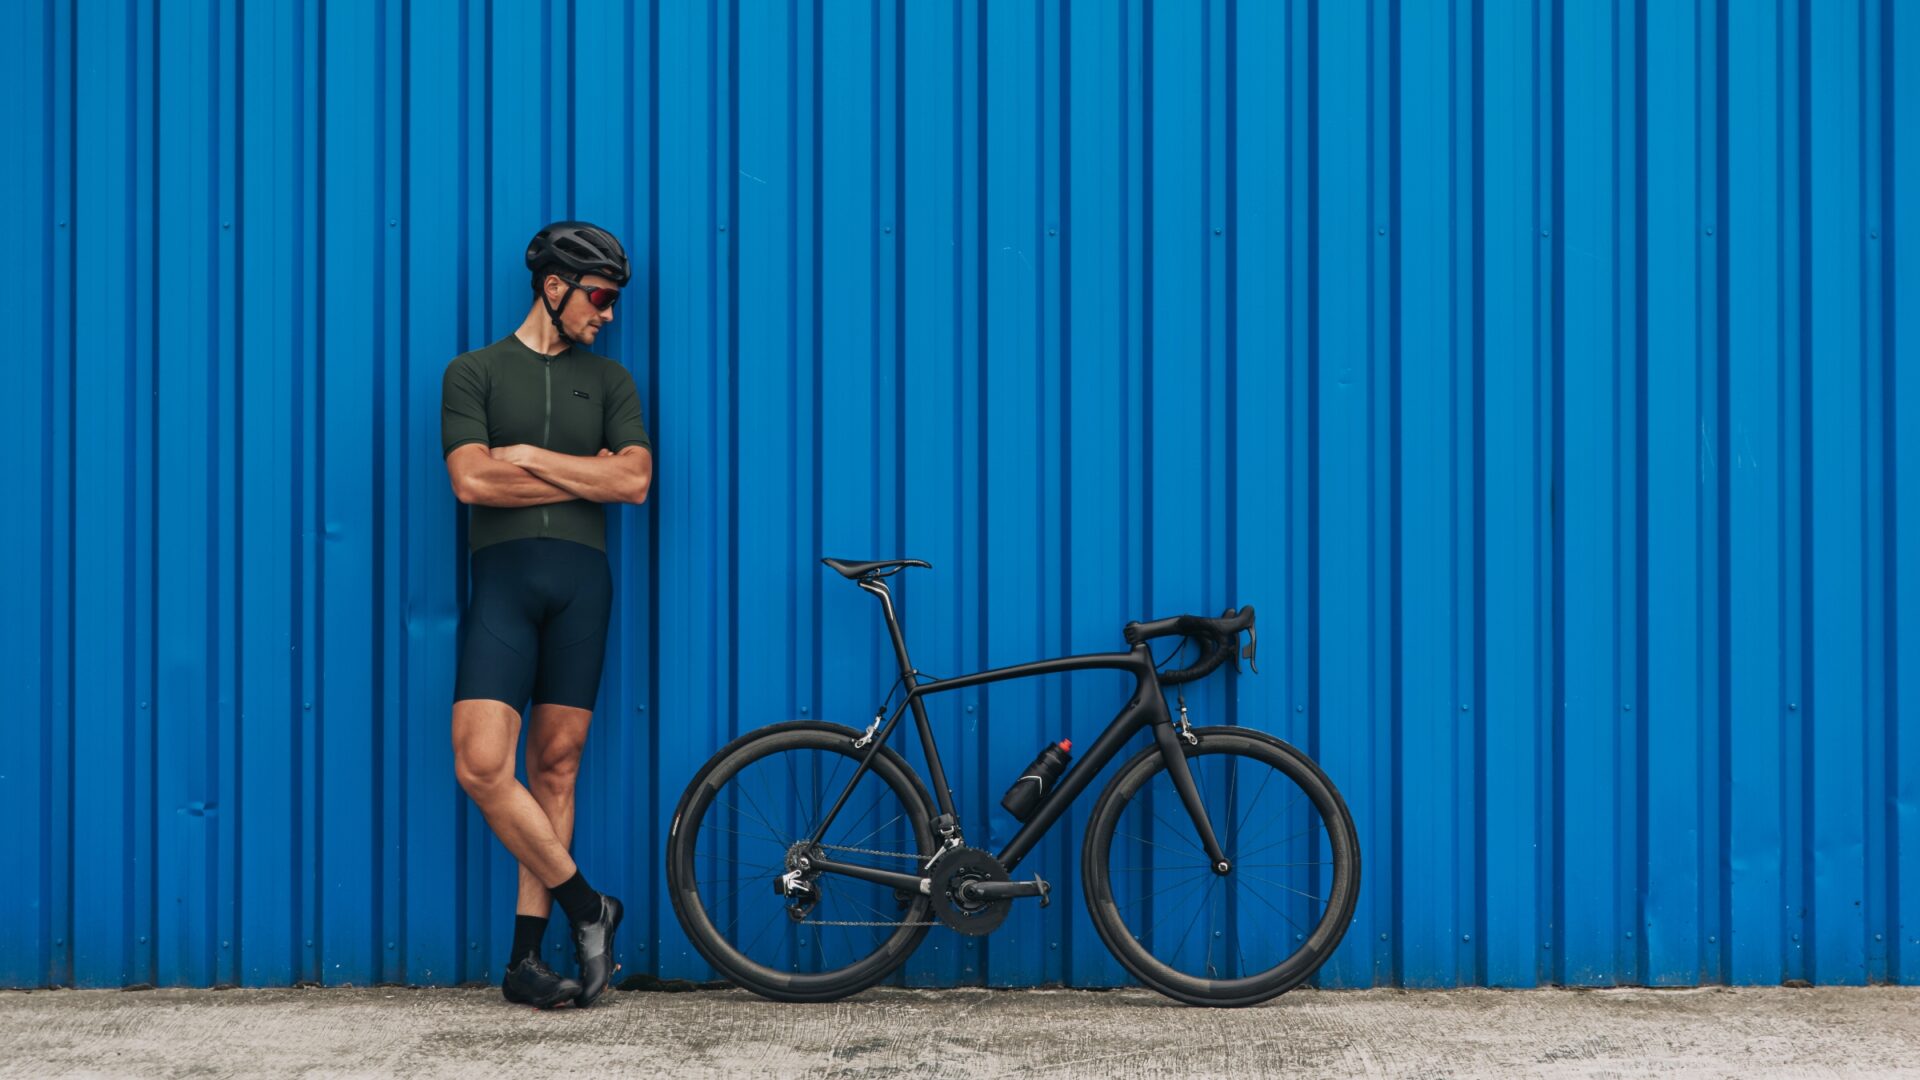 Man leans against a blue shipping container, looking at his all-black bicycle